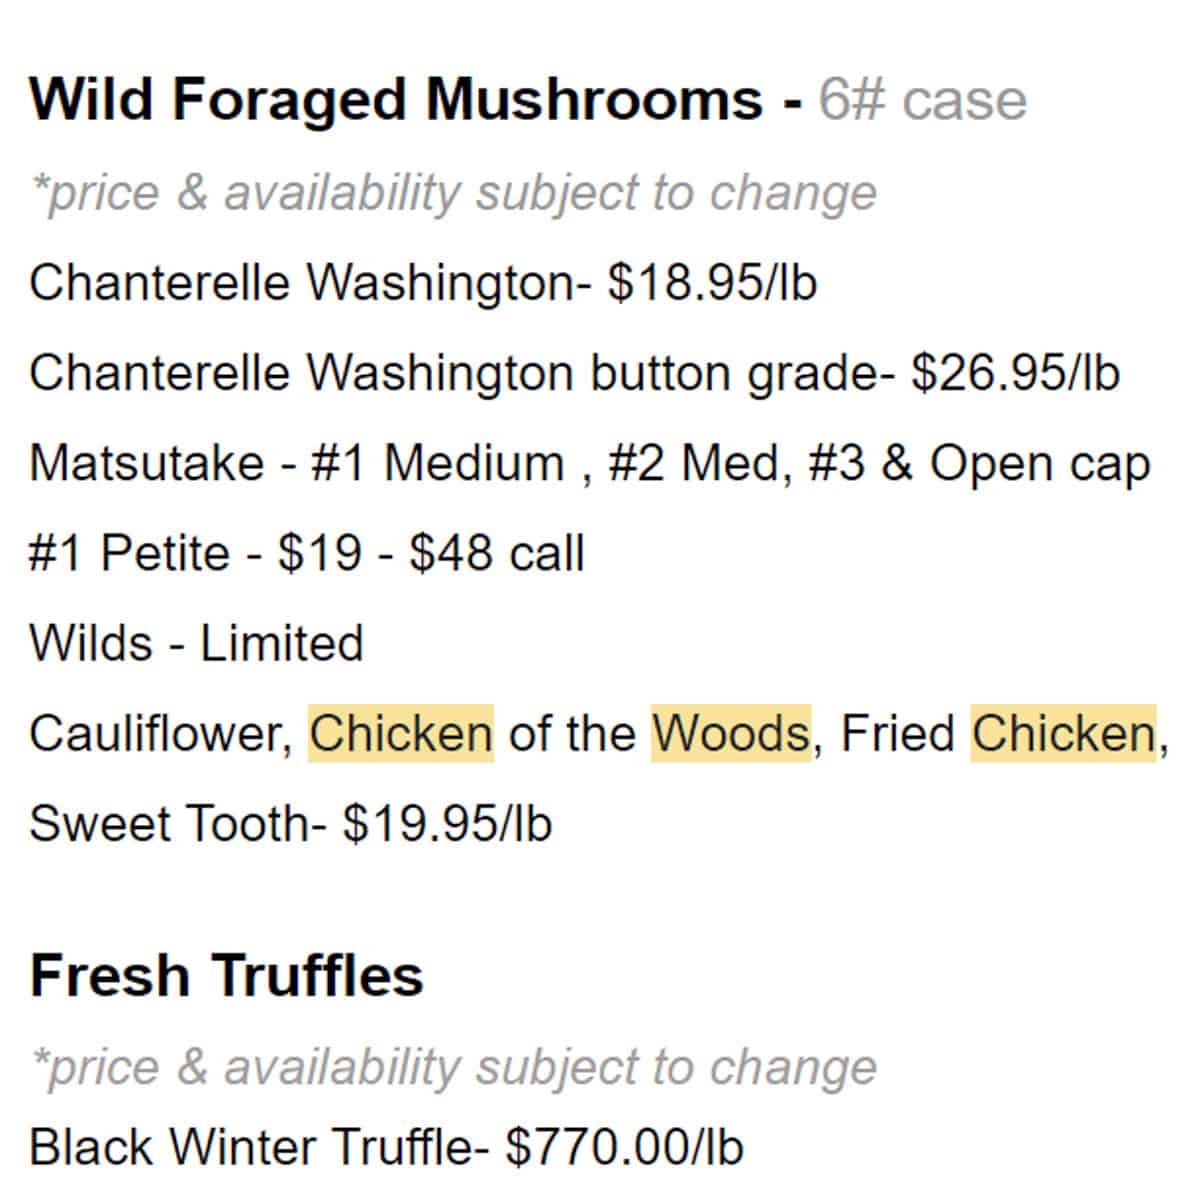 A price list of wild mushrooms including chicken of the woods.